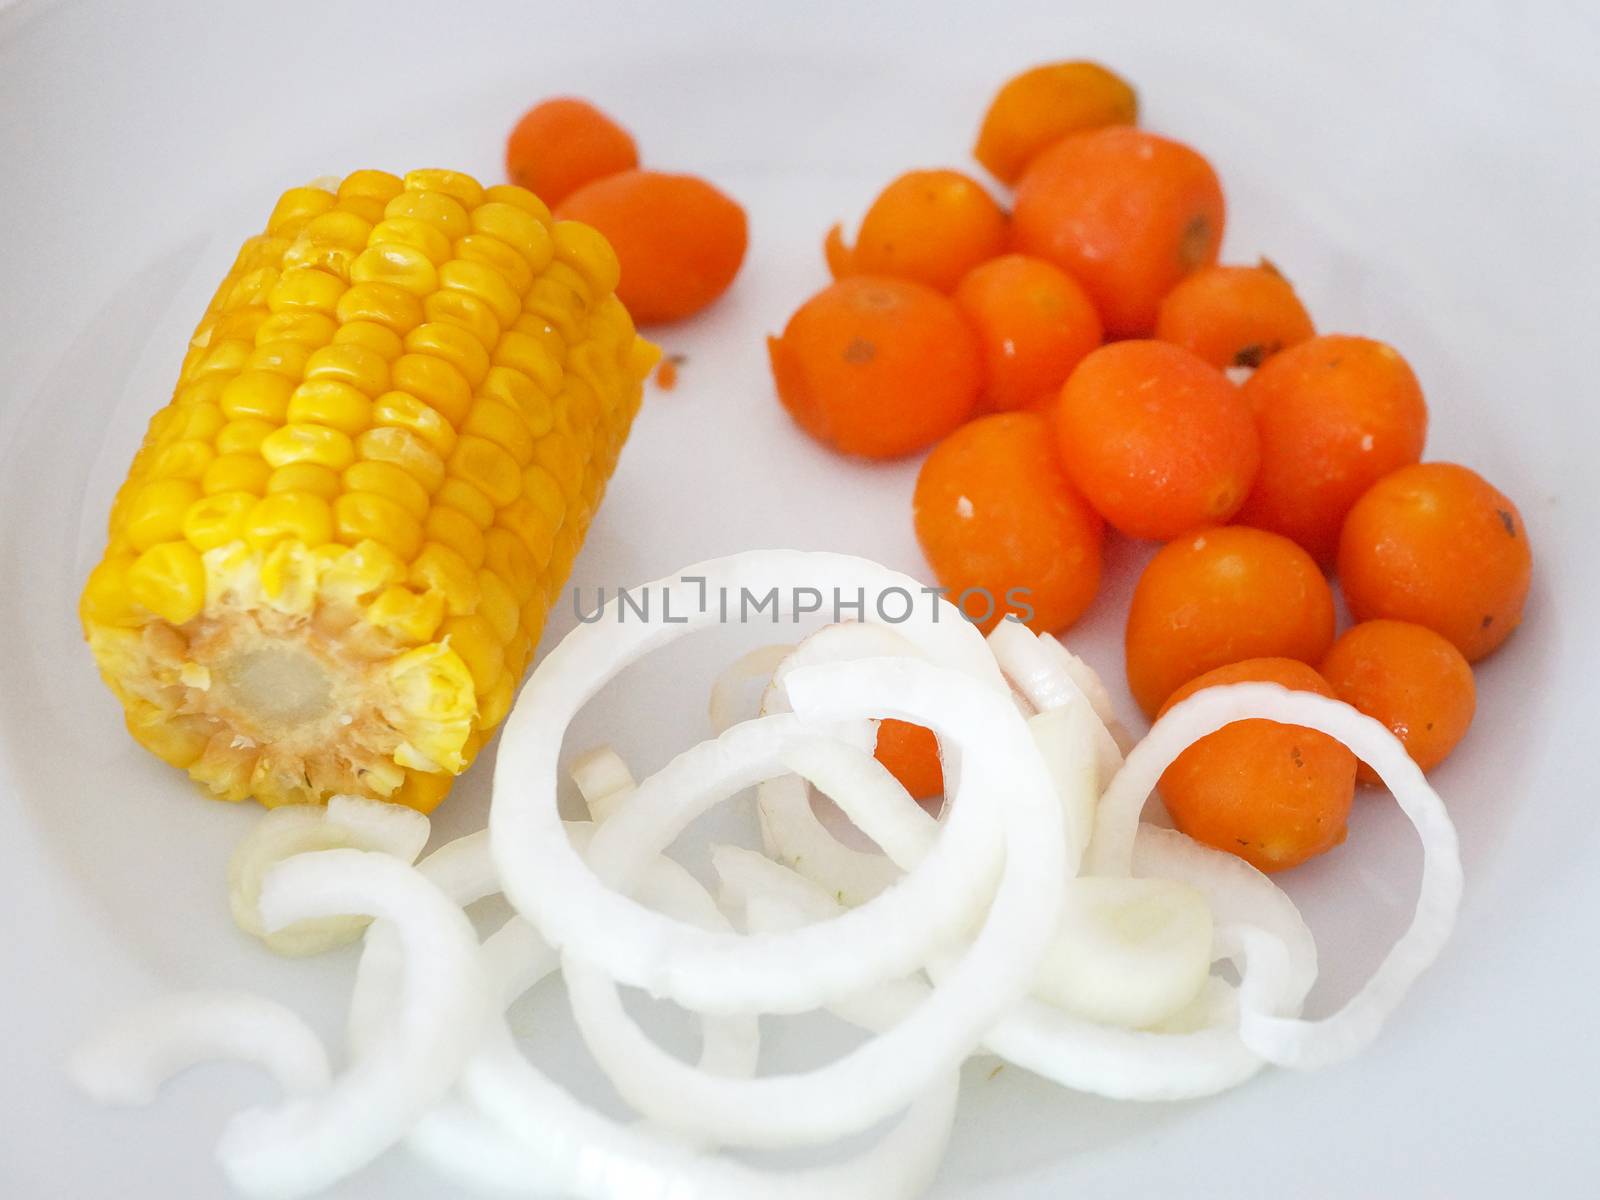 boiled vegetables - corn, carrots and onions in rings on a white plate by Annado